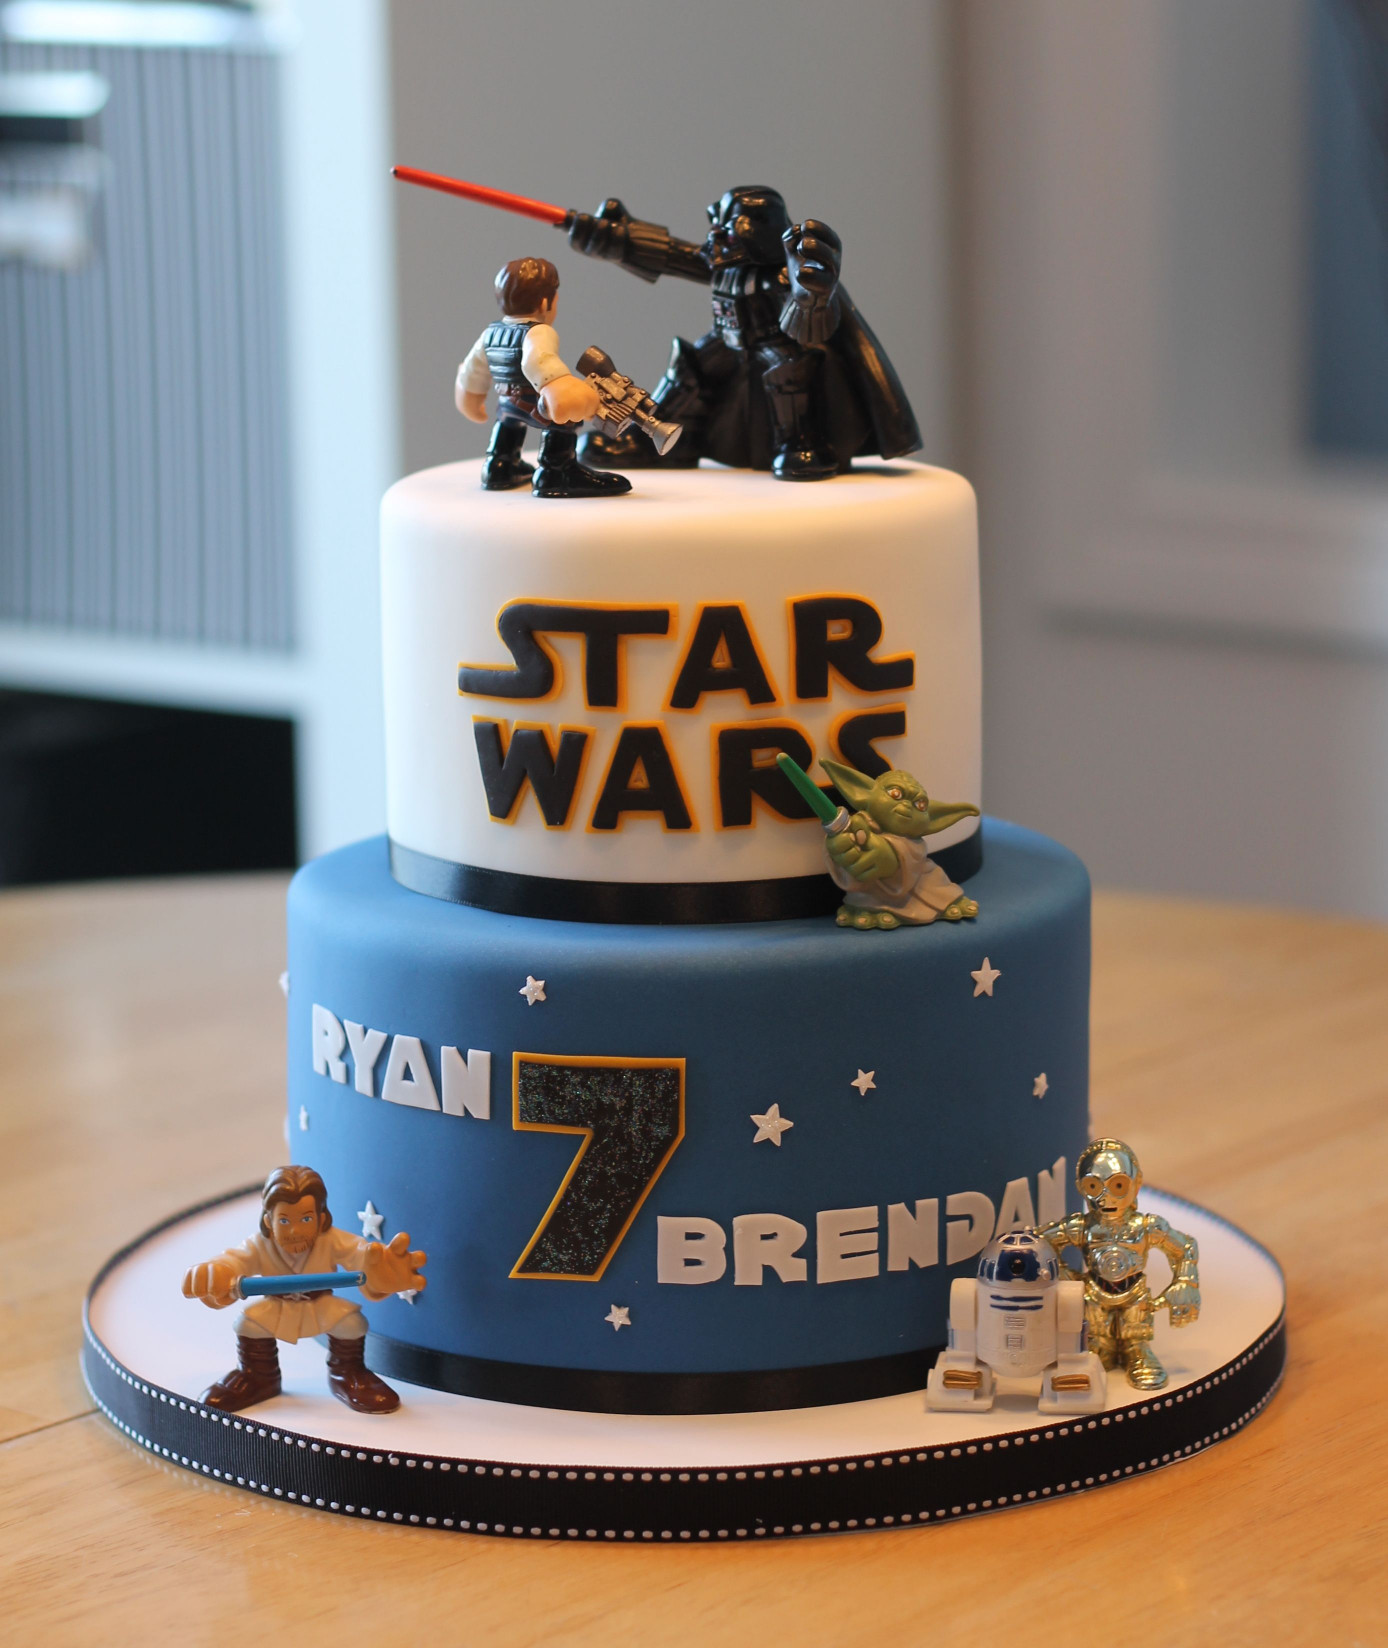 The Best Star Wars Birthday Cake – Home Inspiration and DIY Crafts Ideas